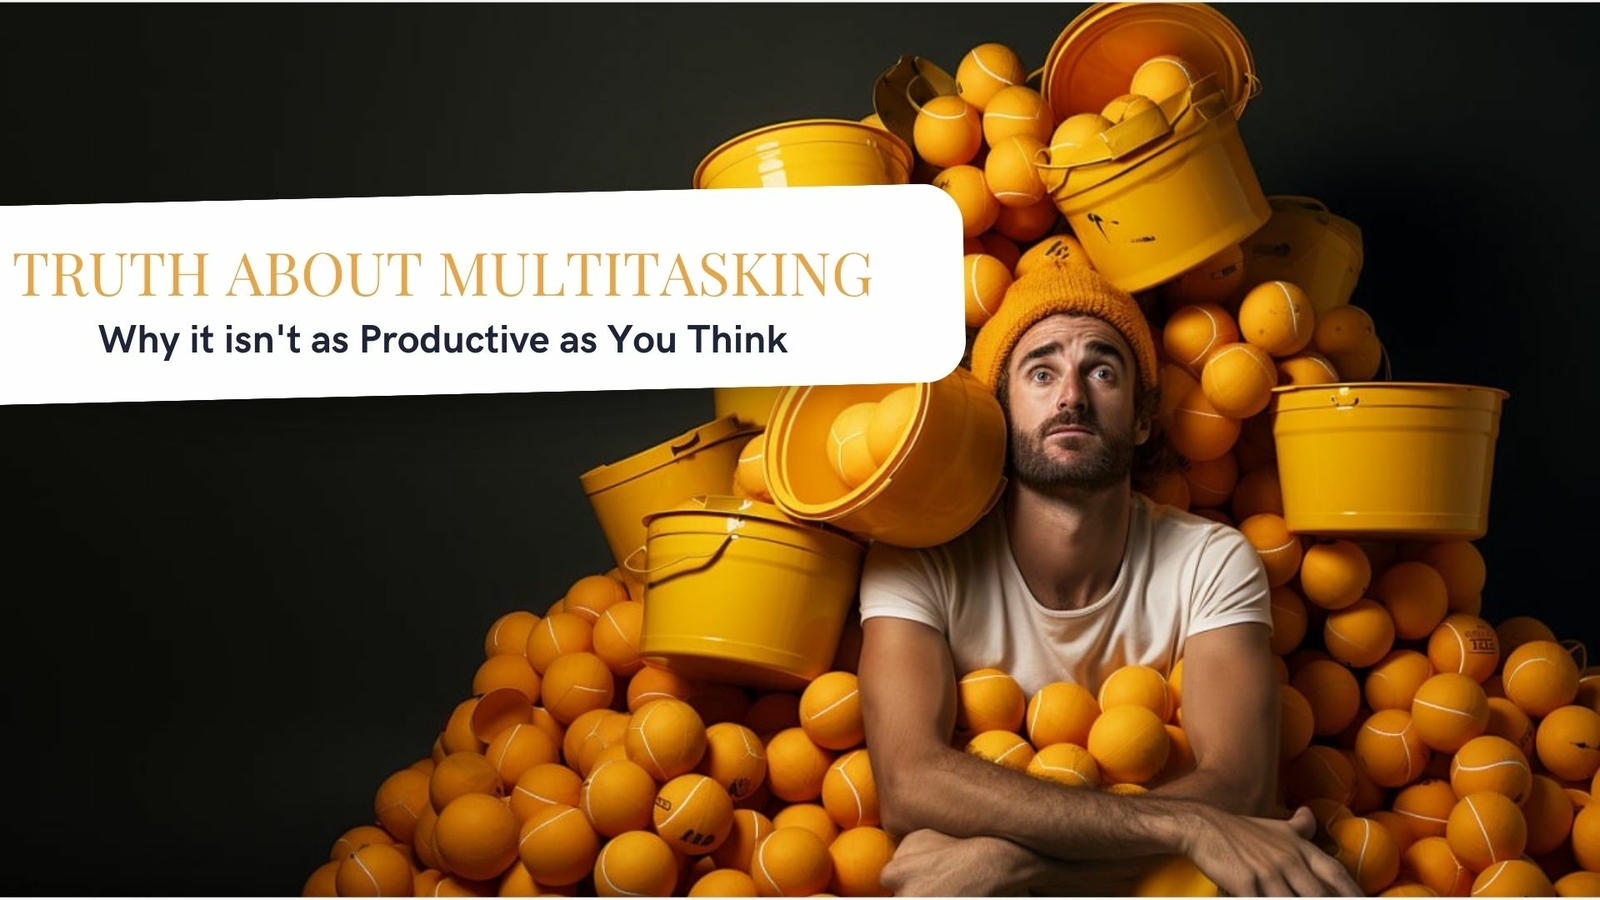 Why Multitasking Isn't as Productive as You Think